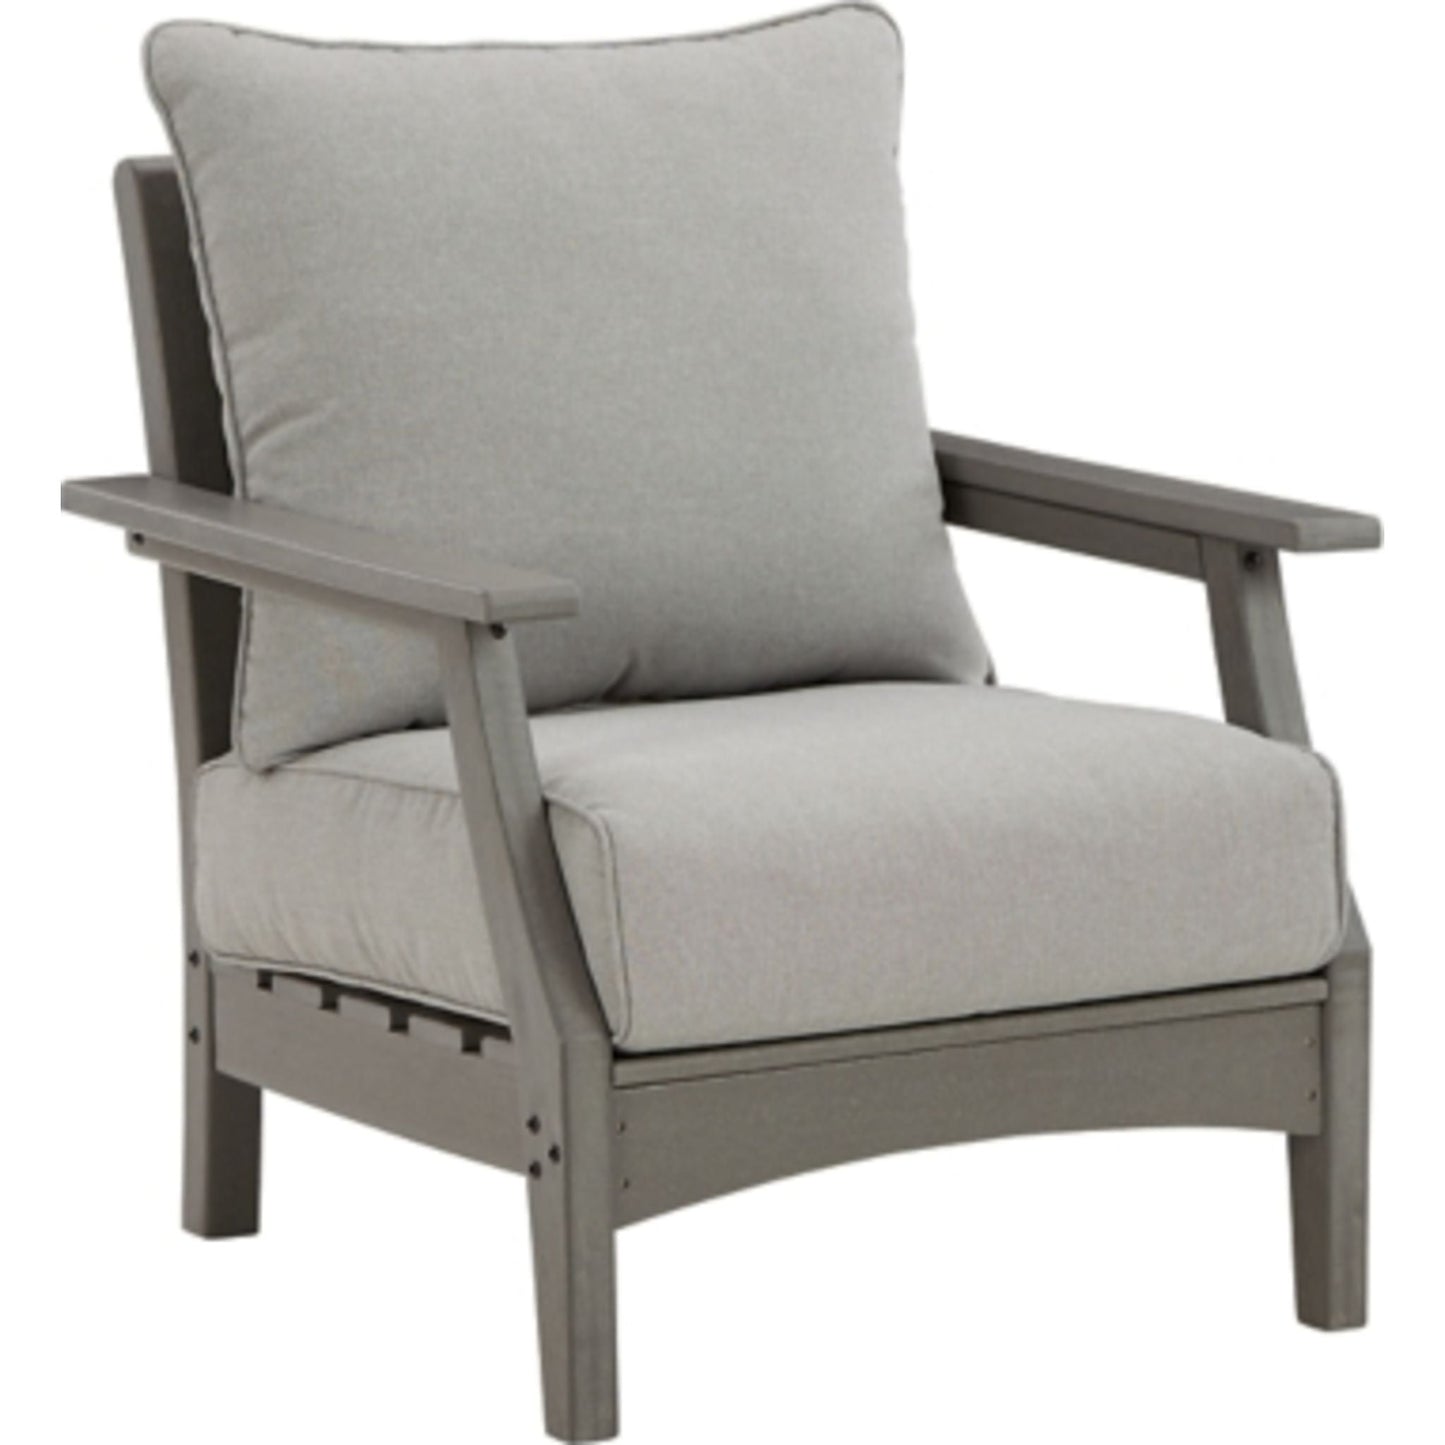 Outdoor Visola Lounge Chair-Set of 2 Gray